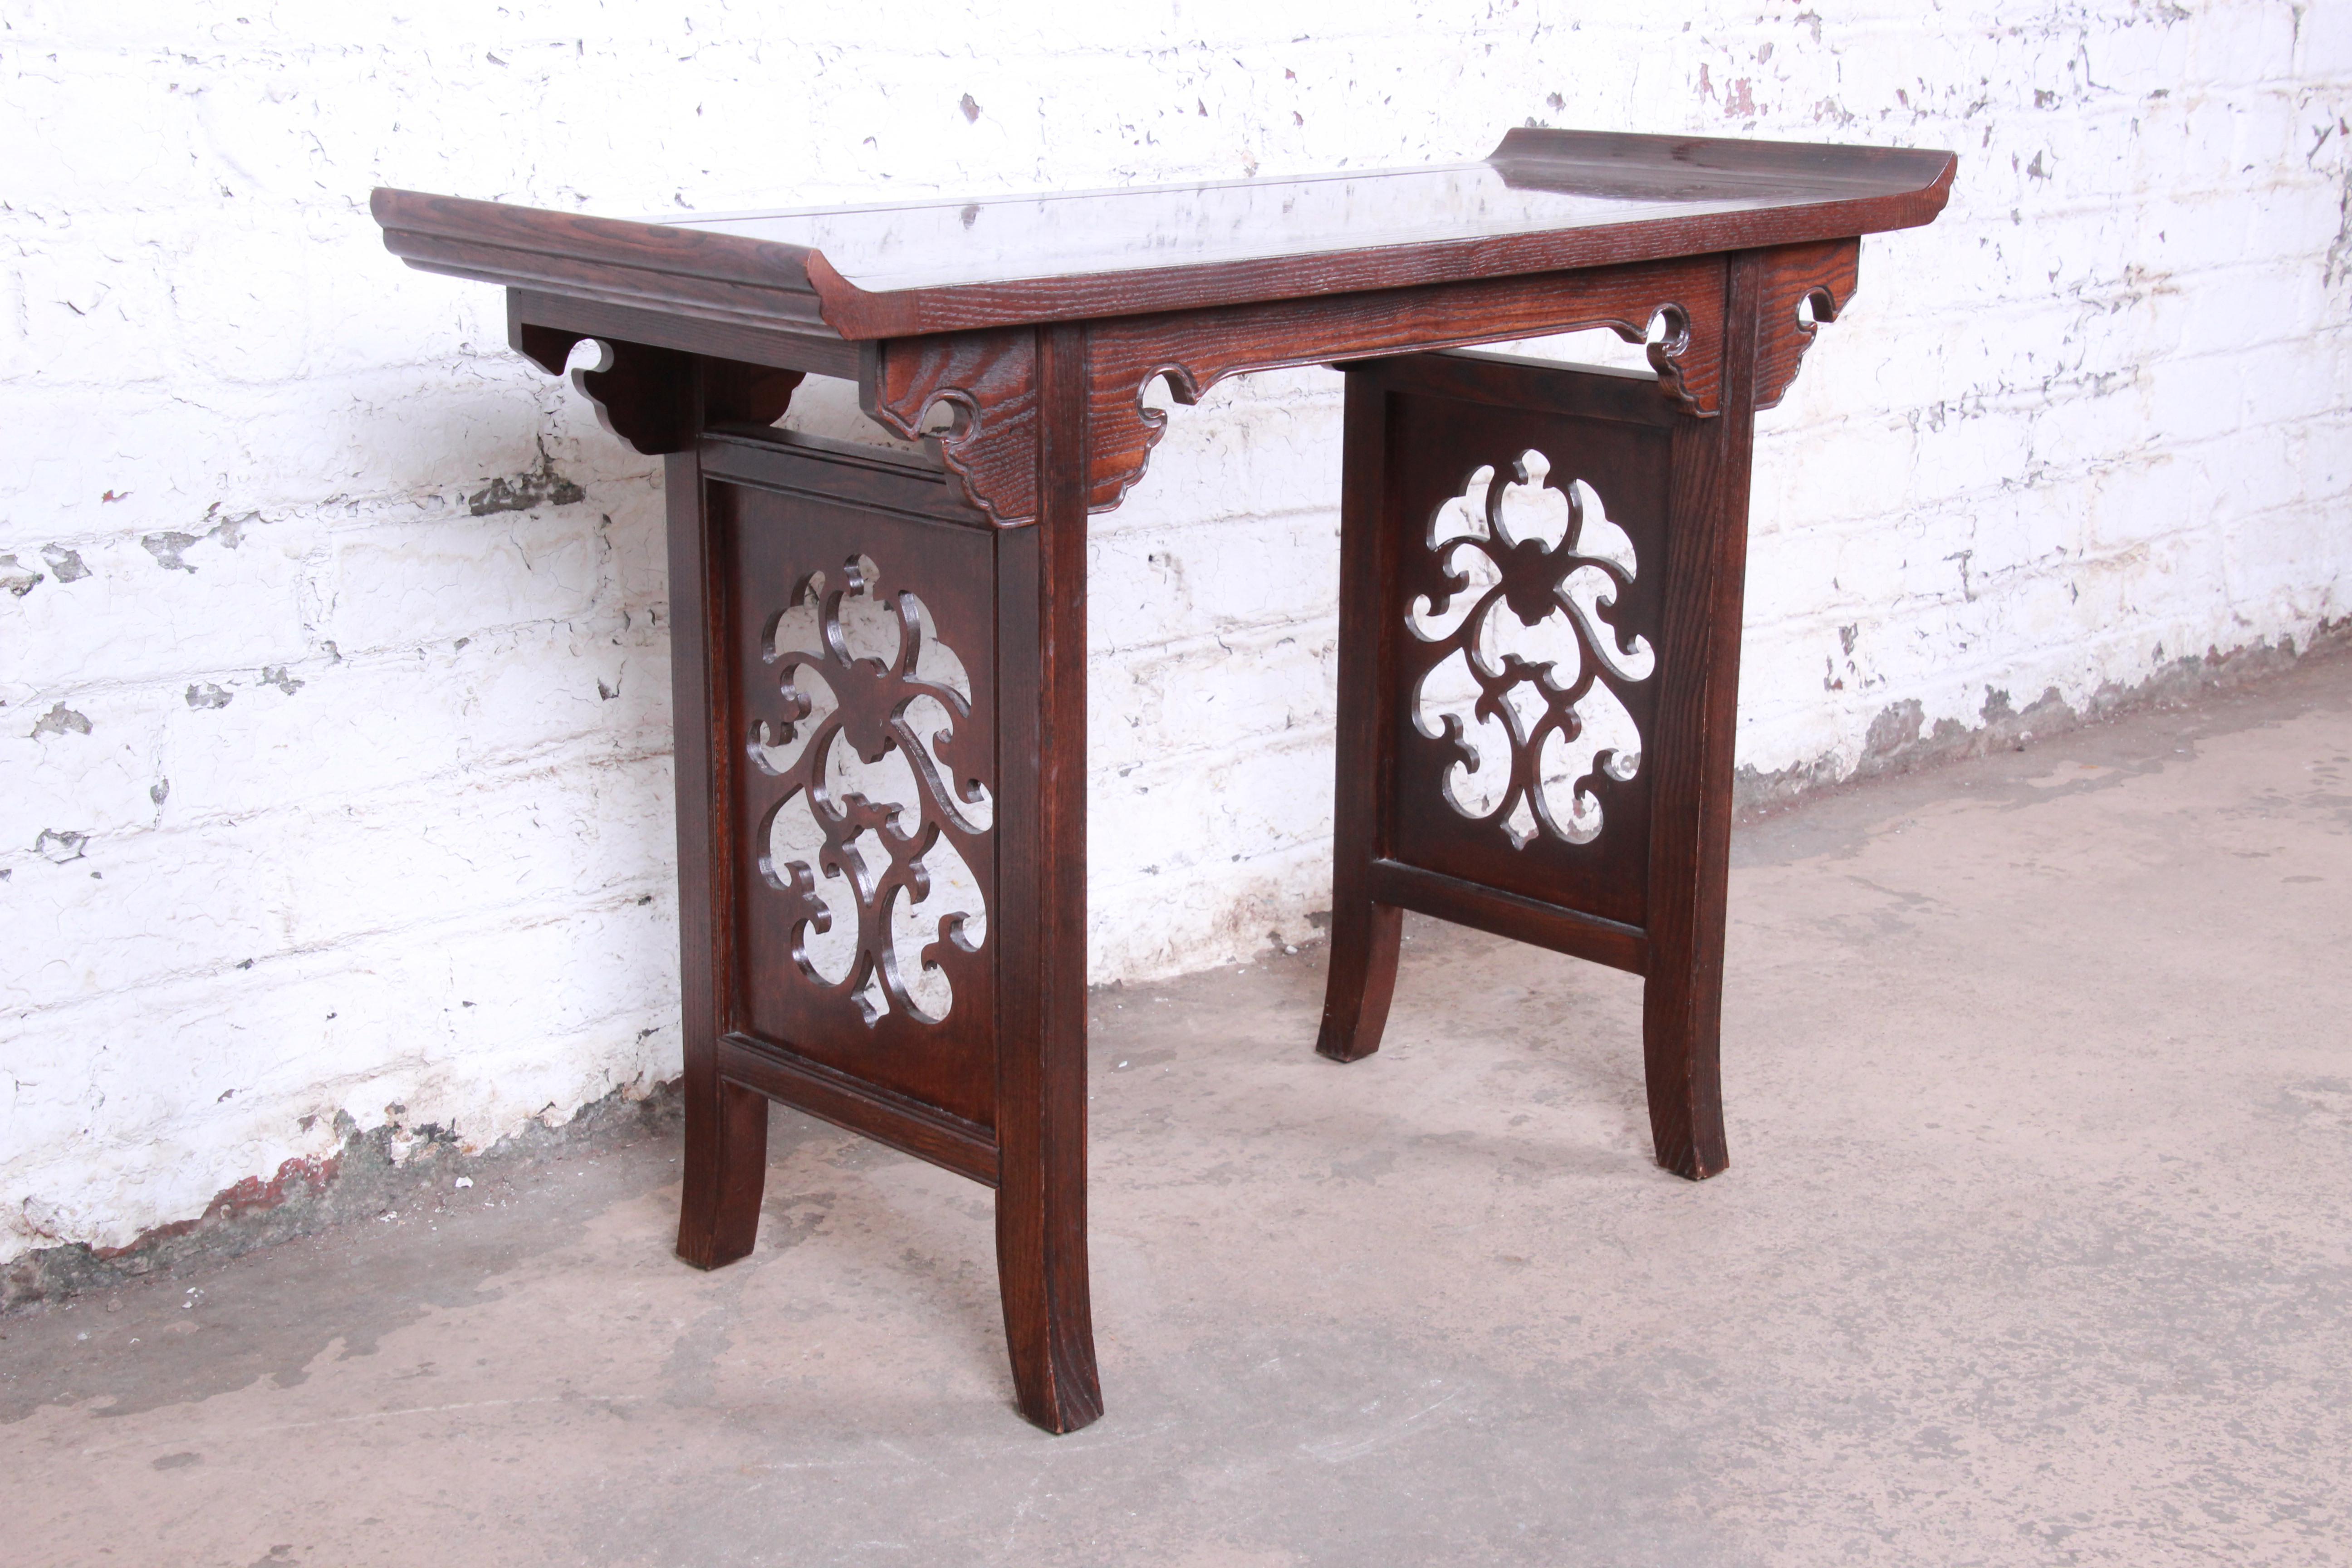 Mid-Century Modern chinoiserie console or altar table

Designed by Michael Taylor for Baker Furniture

USA, circa 1960s

Carved walnut + burl

Measures: 40.25